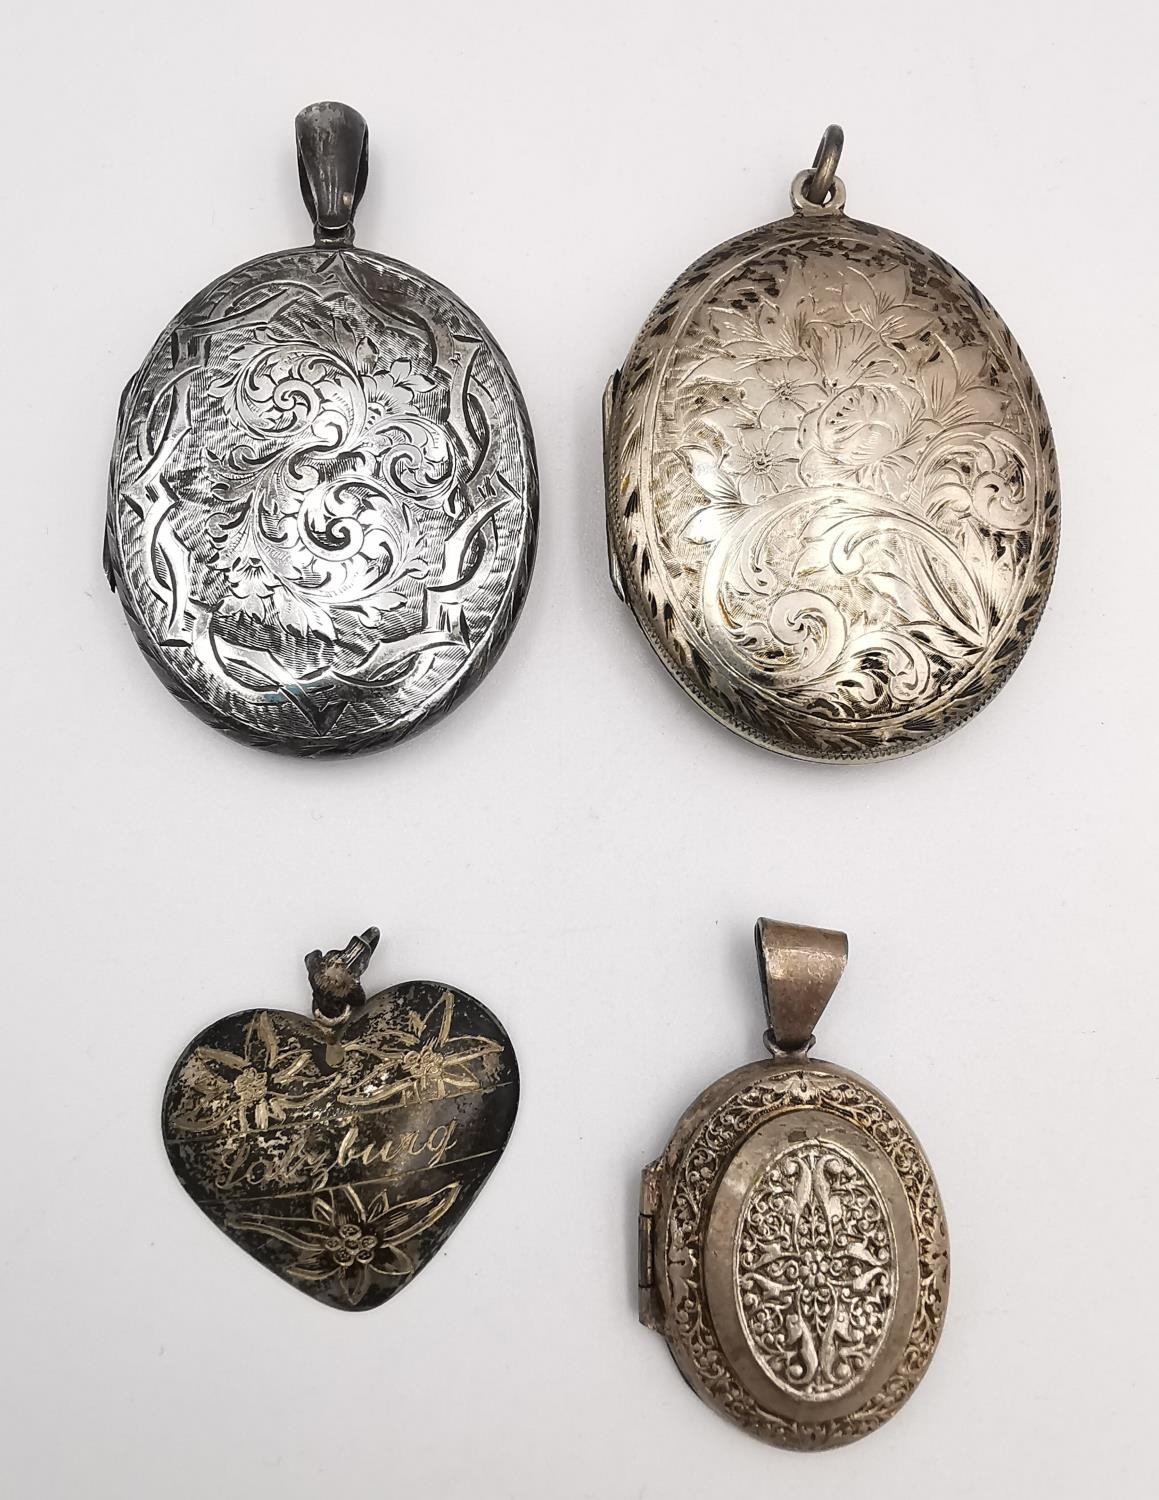 A collection of a three silver lockets and a Swiss engraved silver heart pendant. One locket